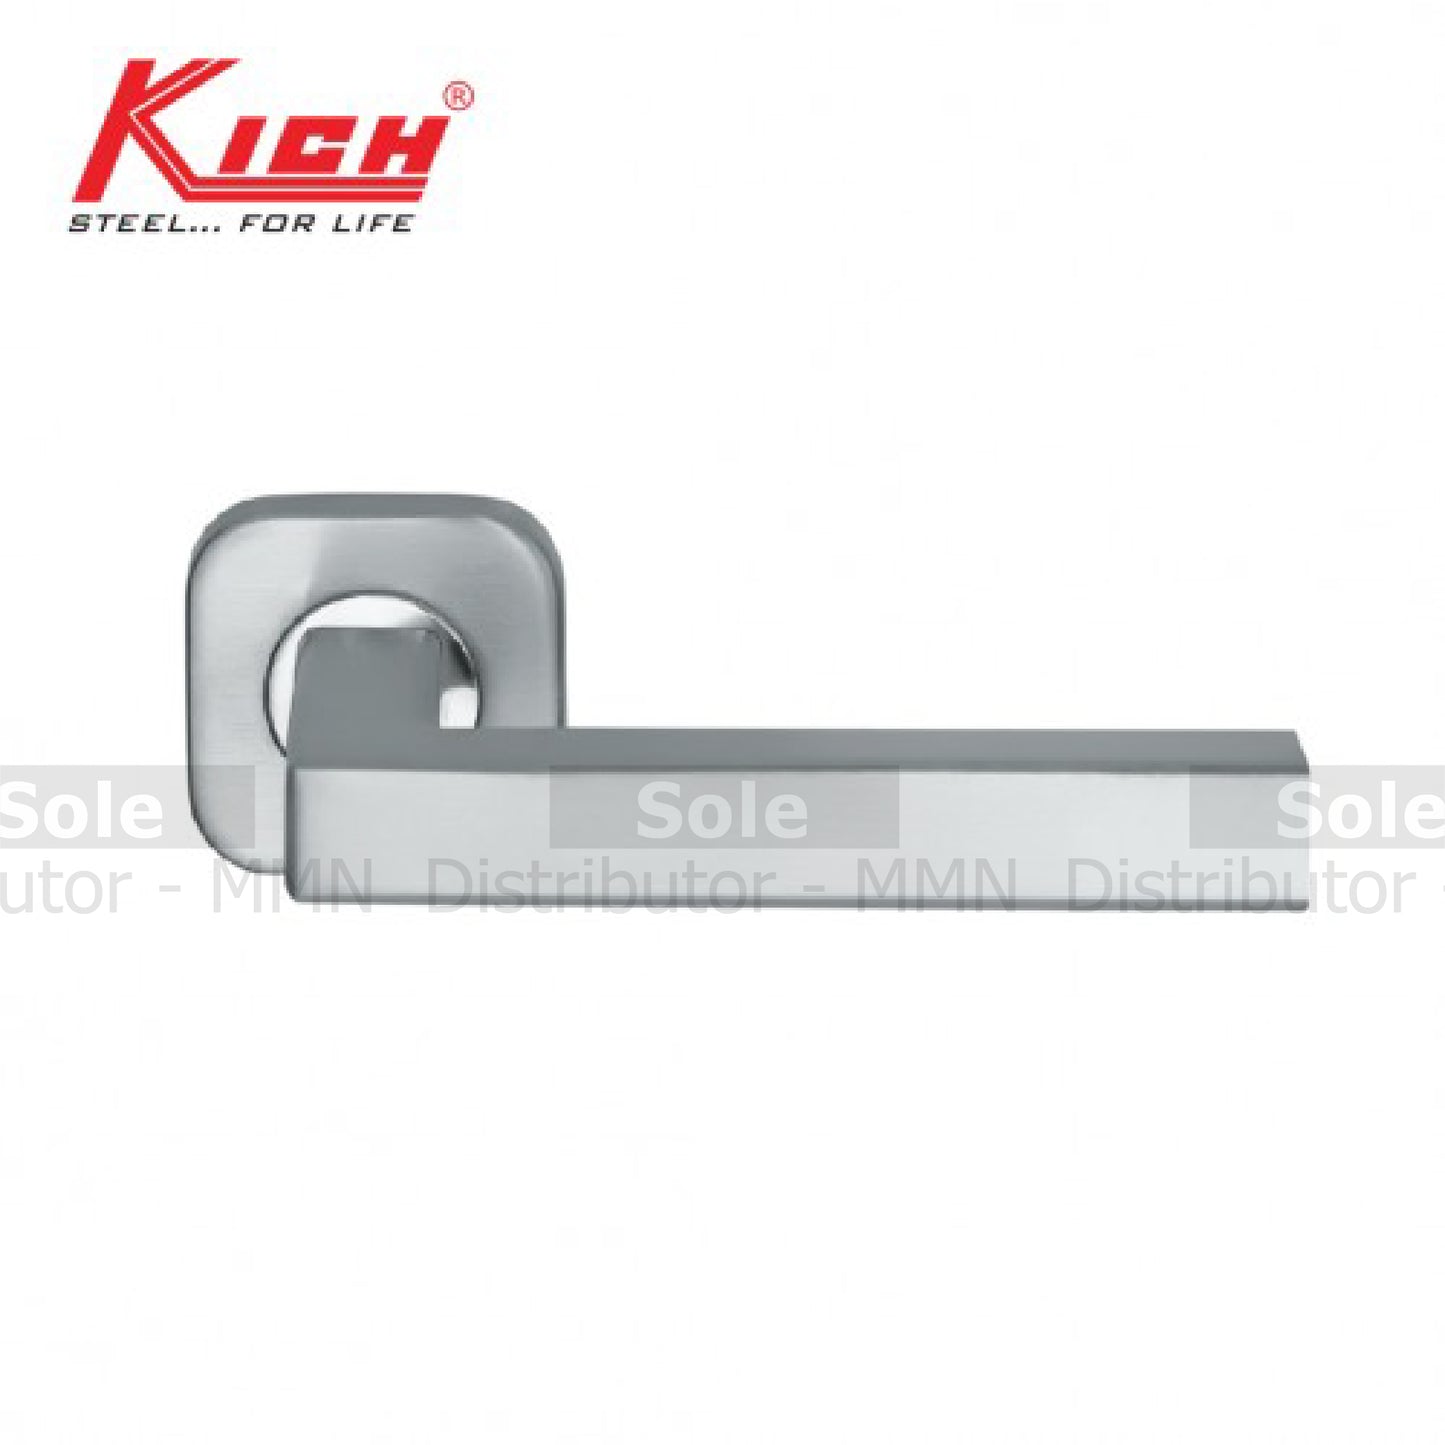 Kich Mortise Lever Handle Set With Escutcheons, Diameter 19mm, 316 Stainless Steel Finish- KMH1923S